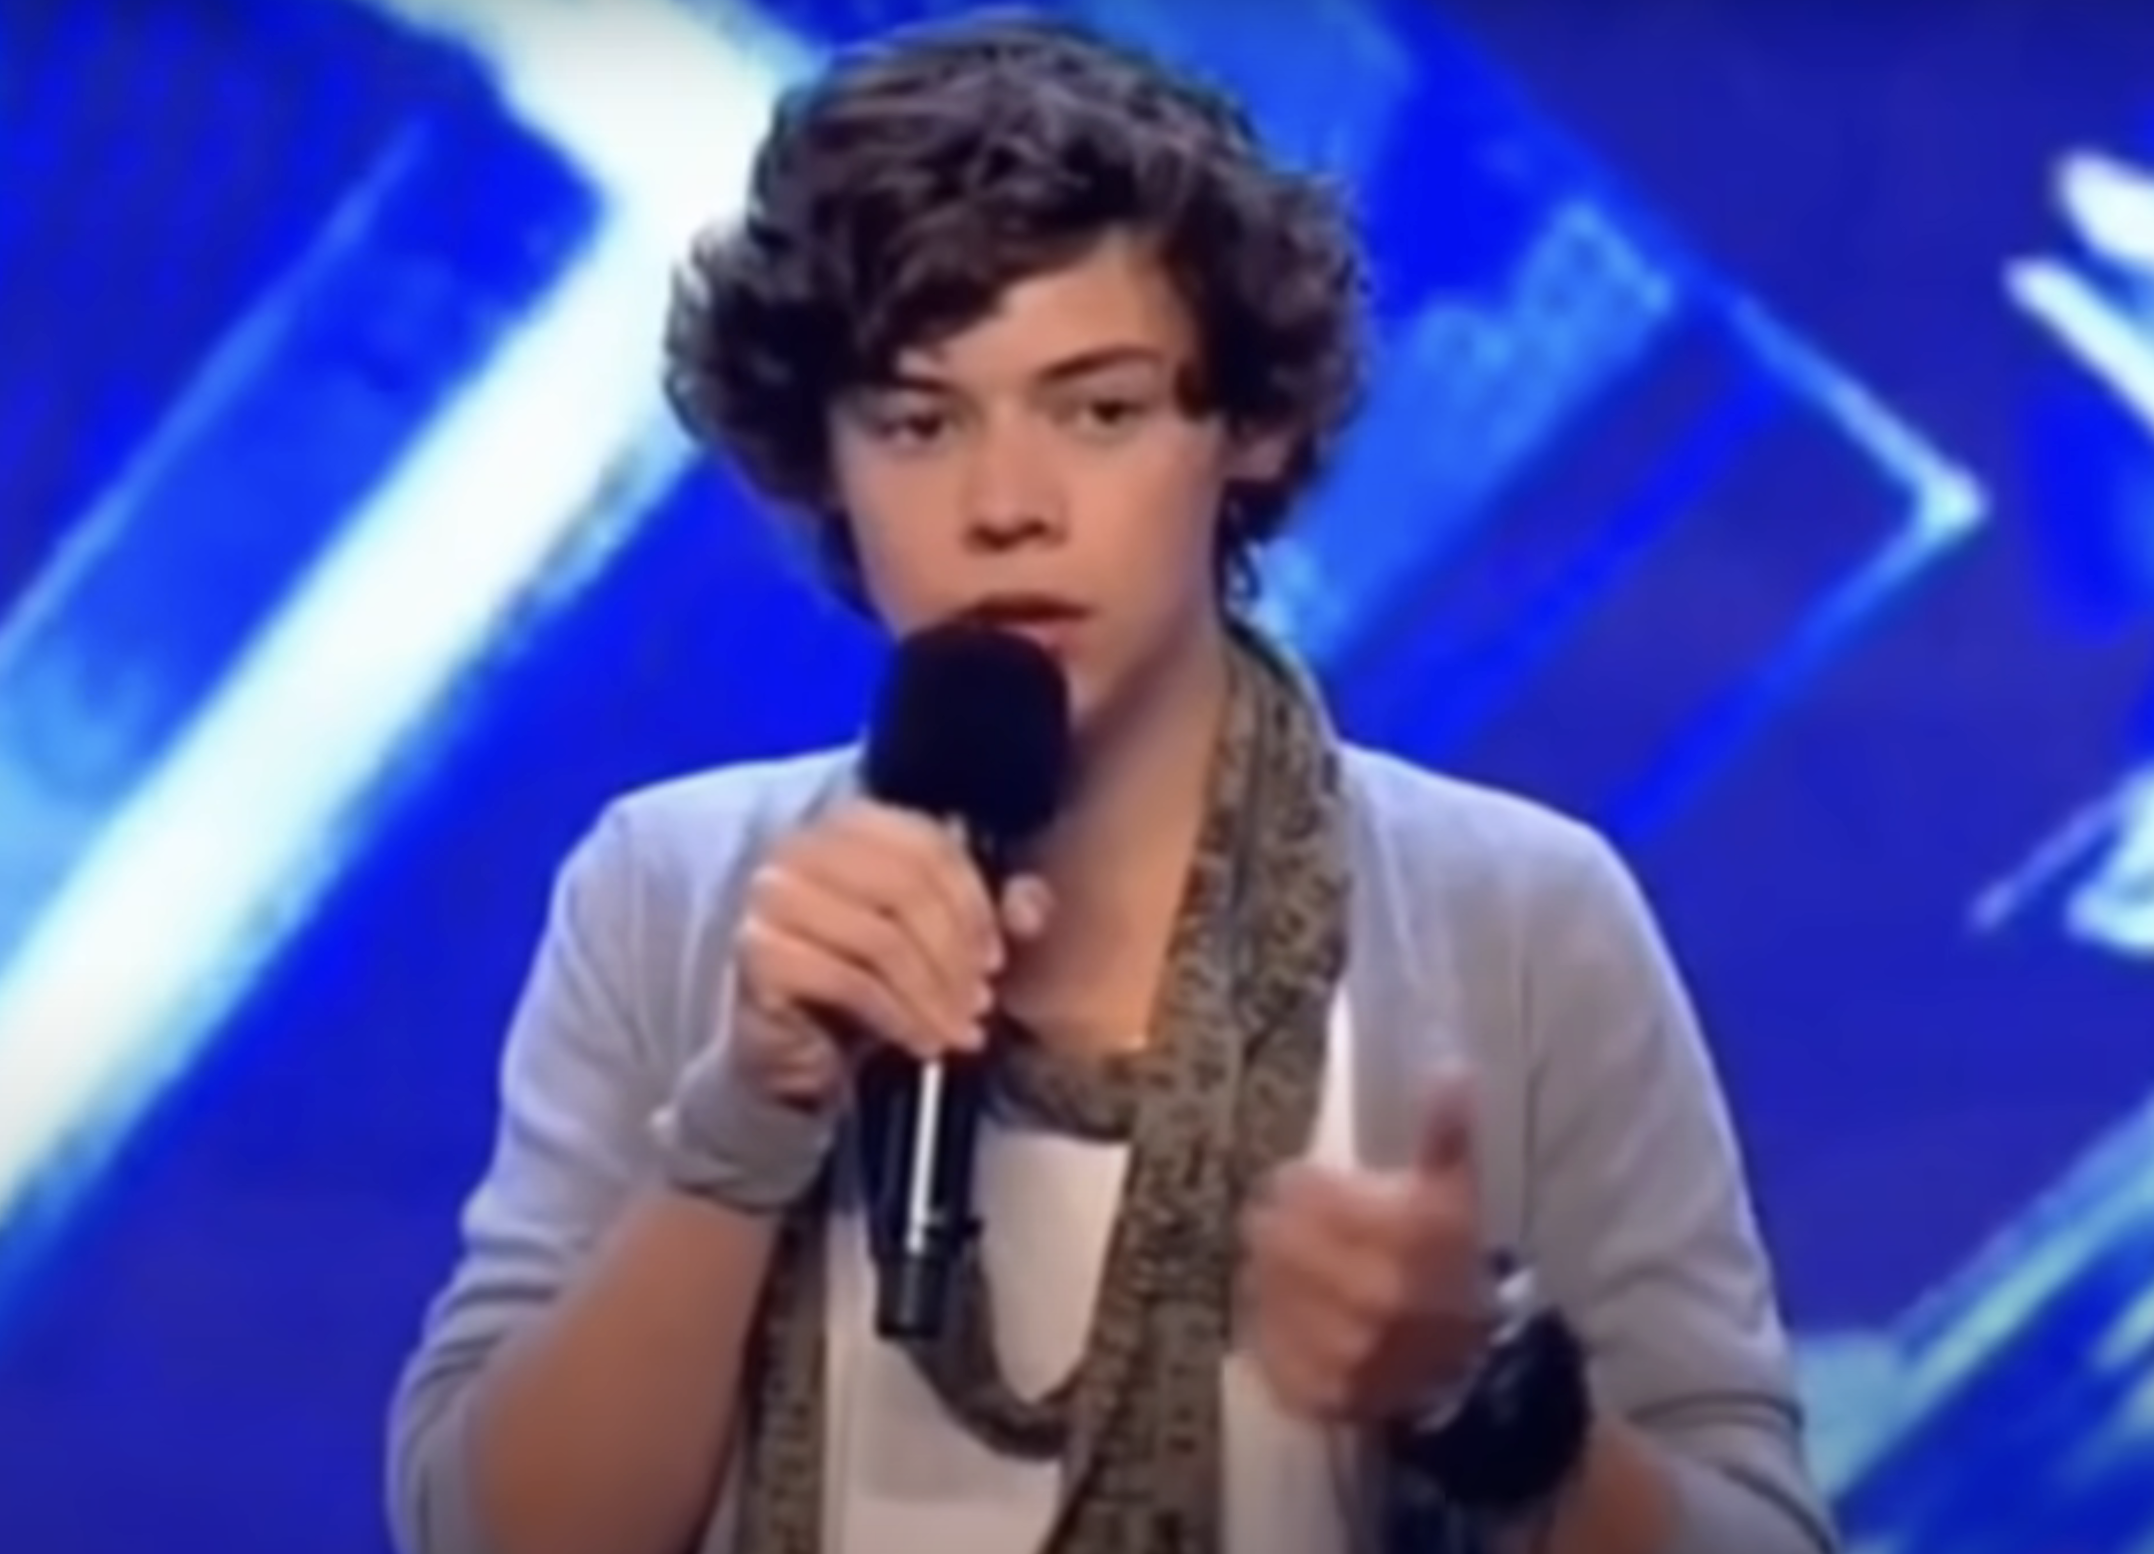 Harry Styles auditioning